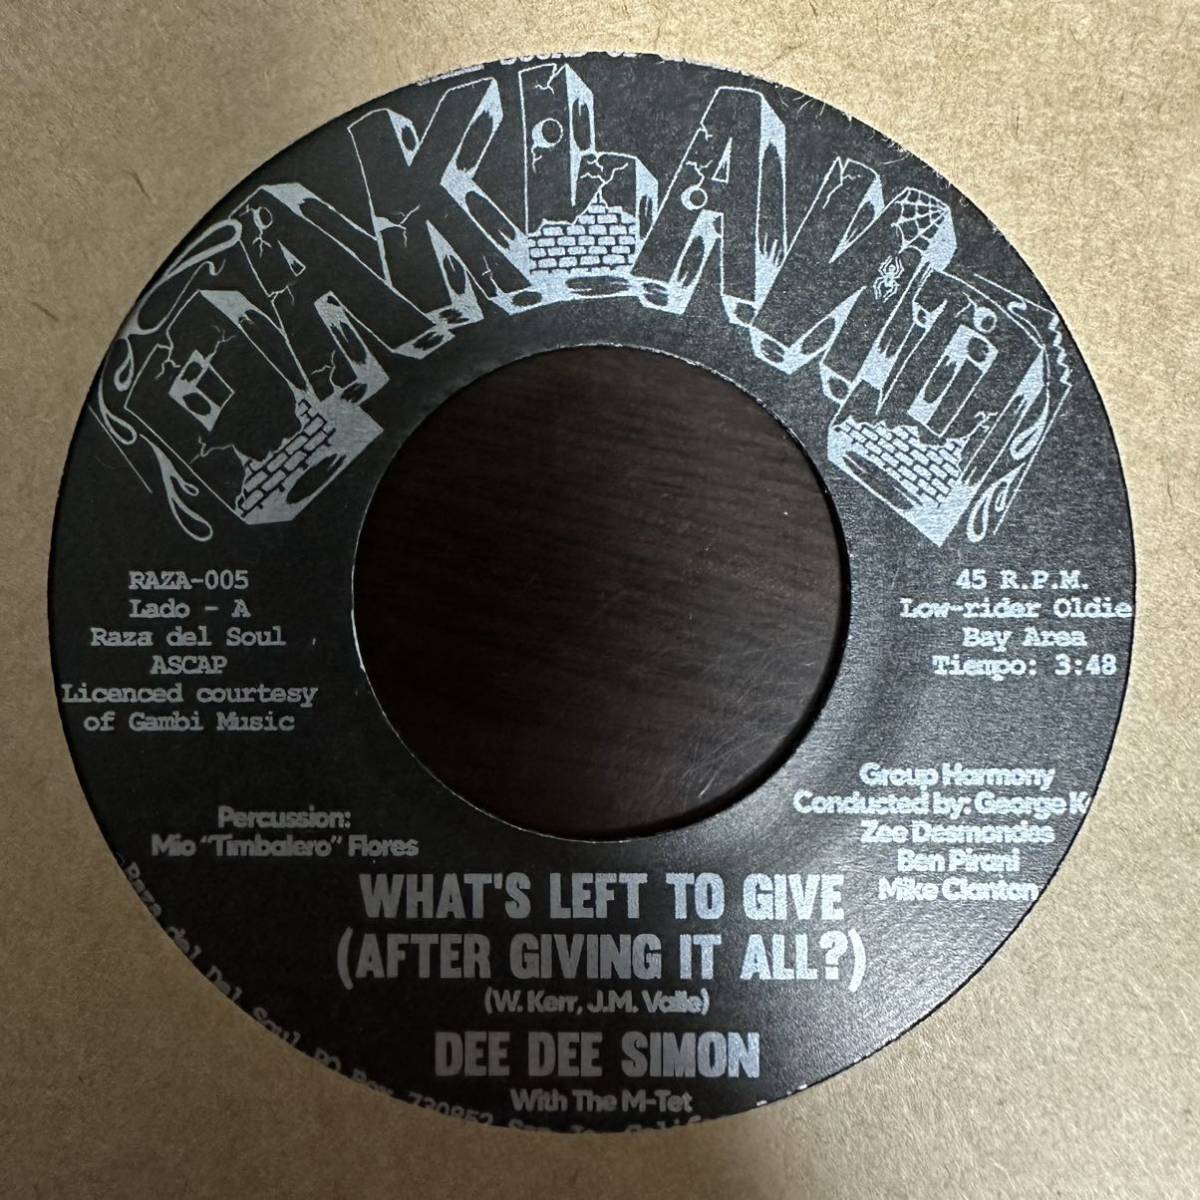 【sweet 人気曲カバー】 DEE DEE SIMON With The M-Tet - WHAT'S LEFT TO GIVE (AFTER GIVING IT ALL?) The Whatnauts カバー